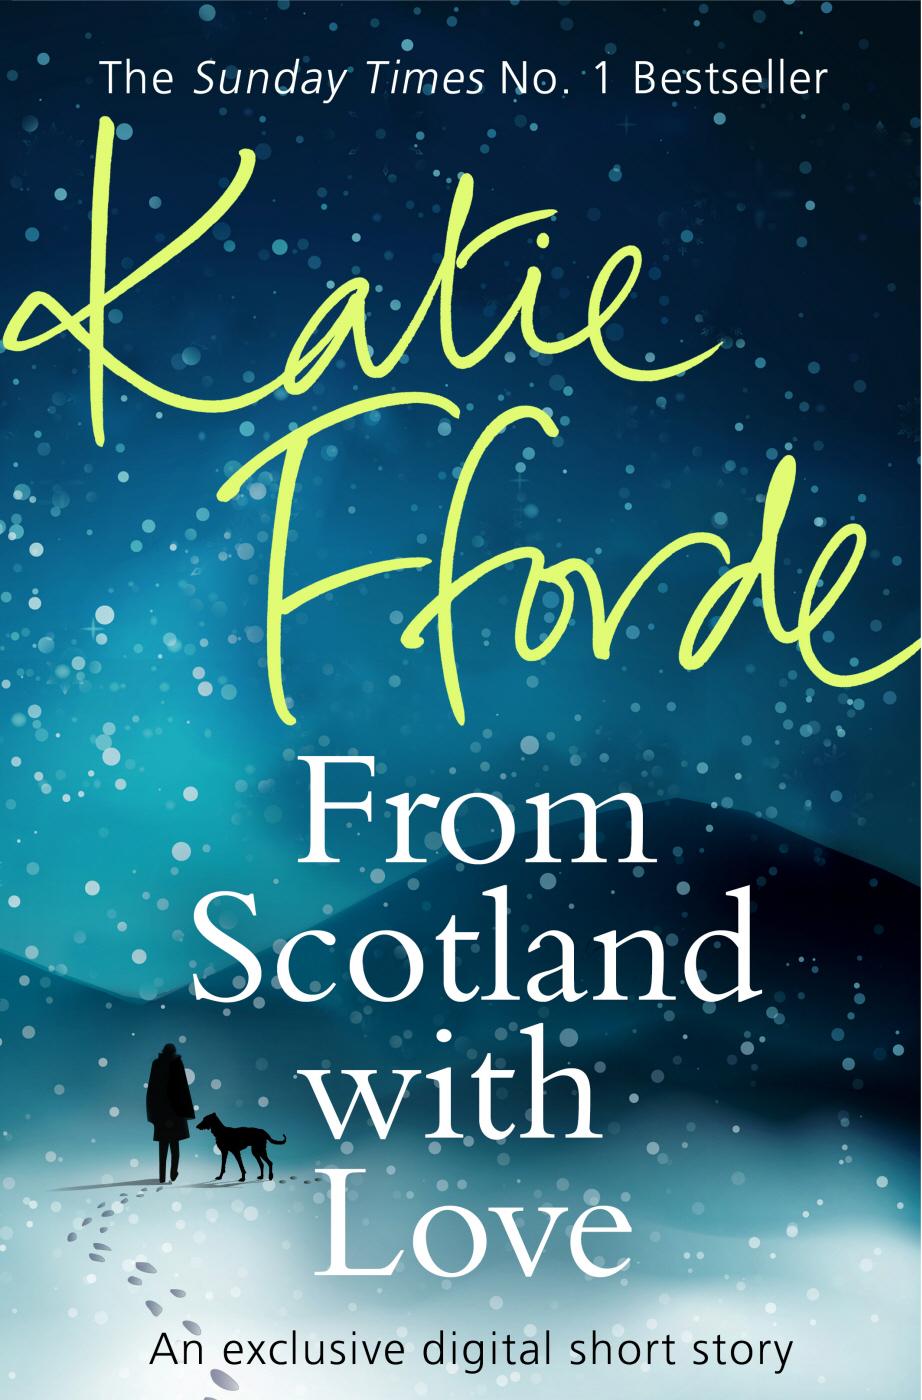 From Scotland with Love by Katie Fforde